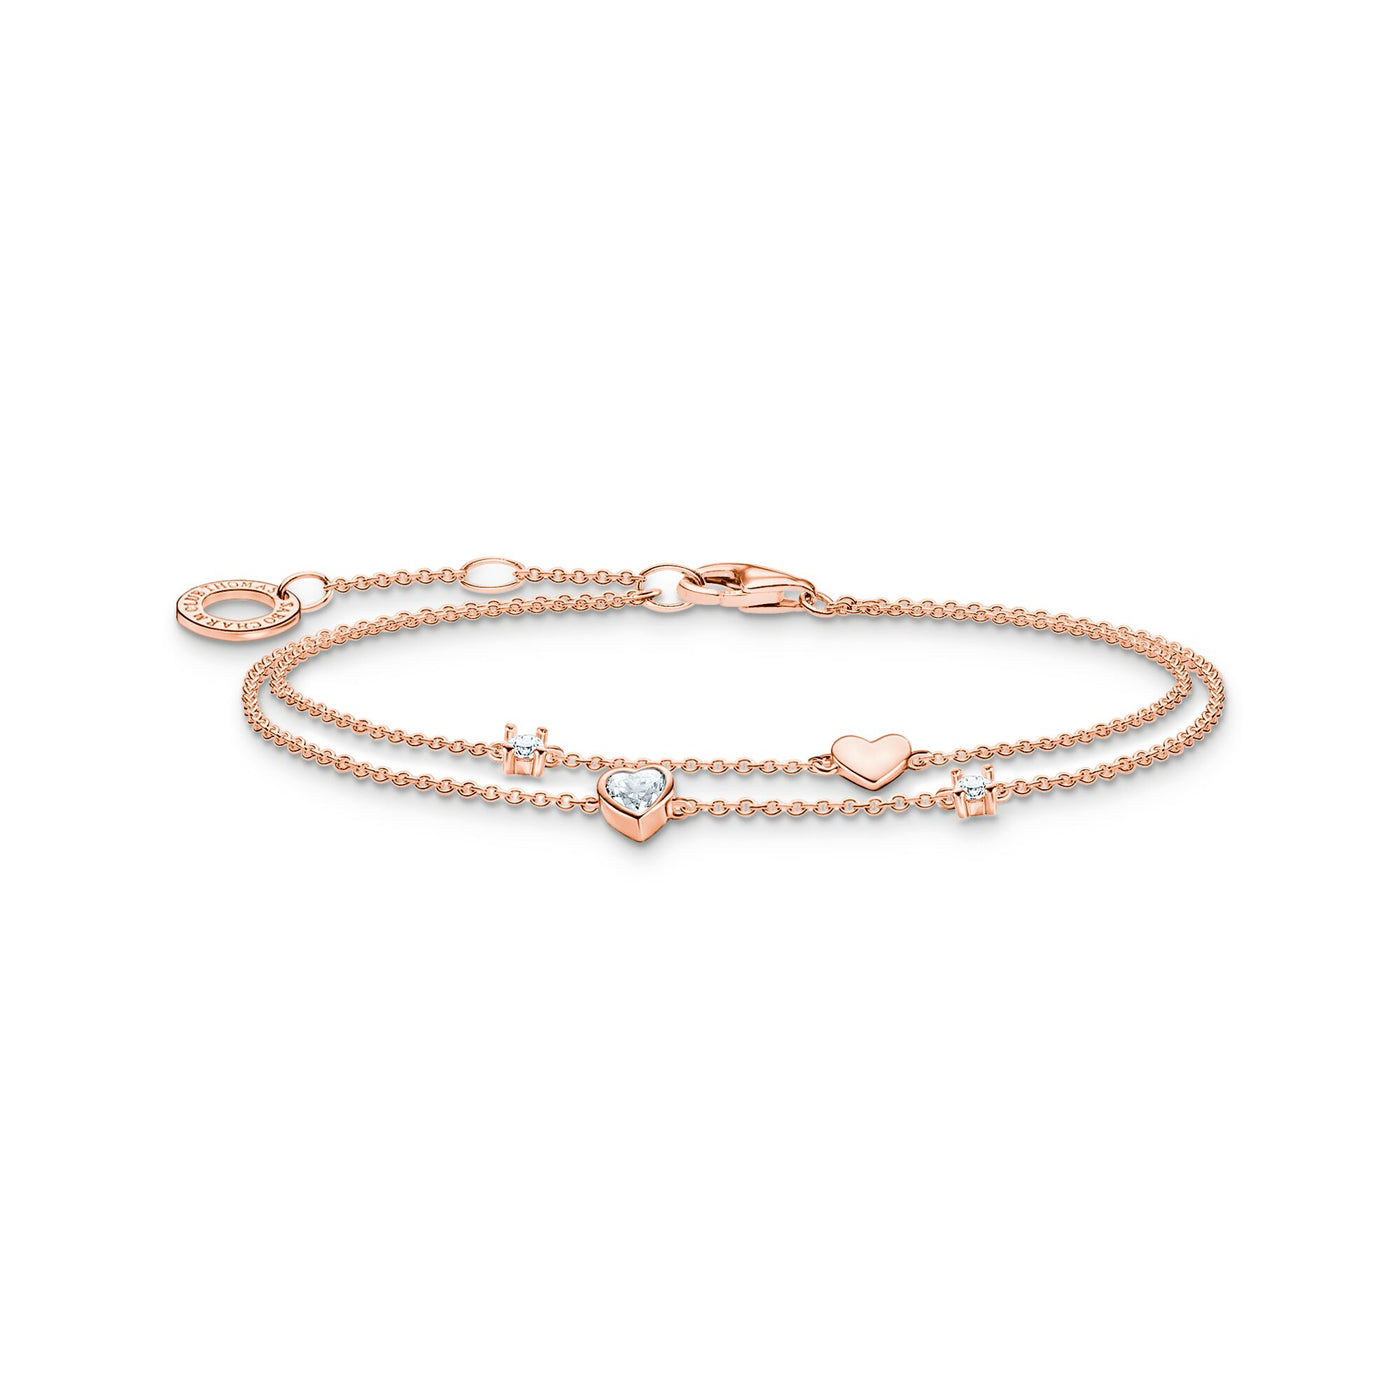 Thomas Sabo Bracelet with hearts and white stones rose gold